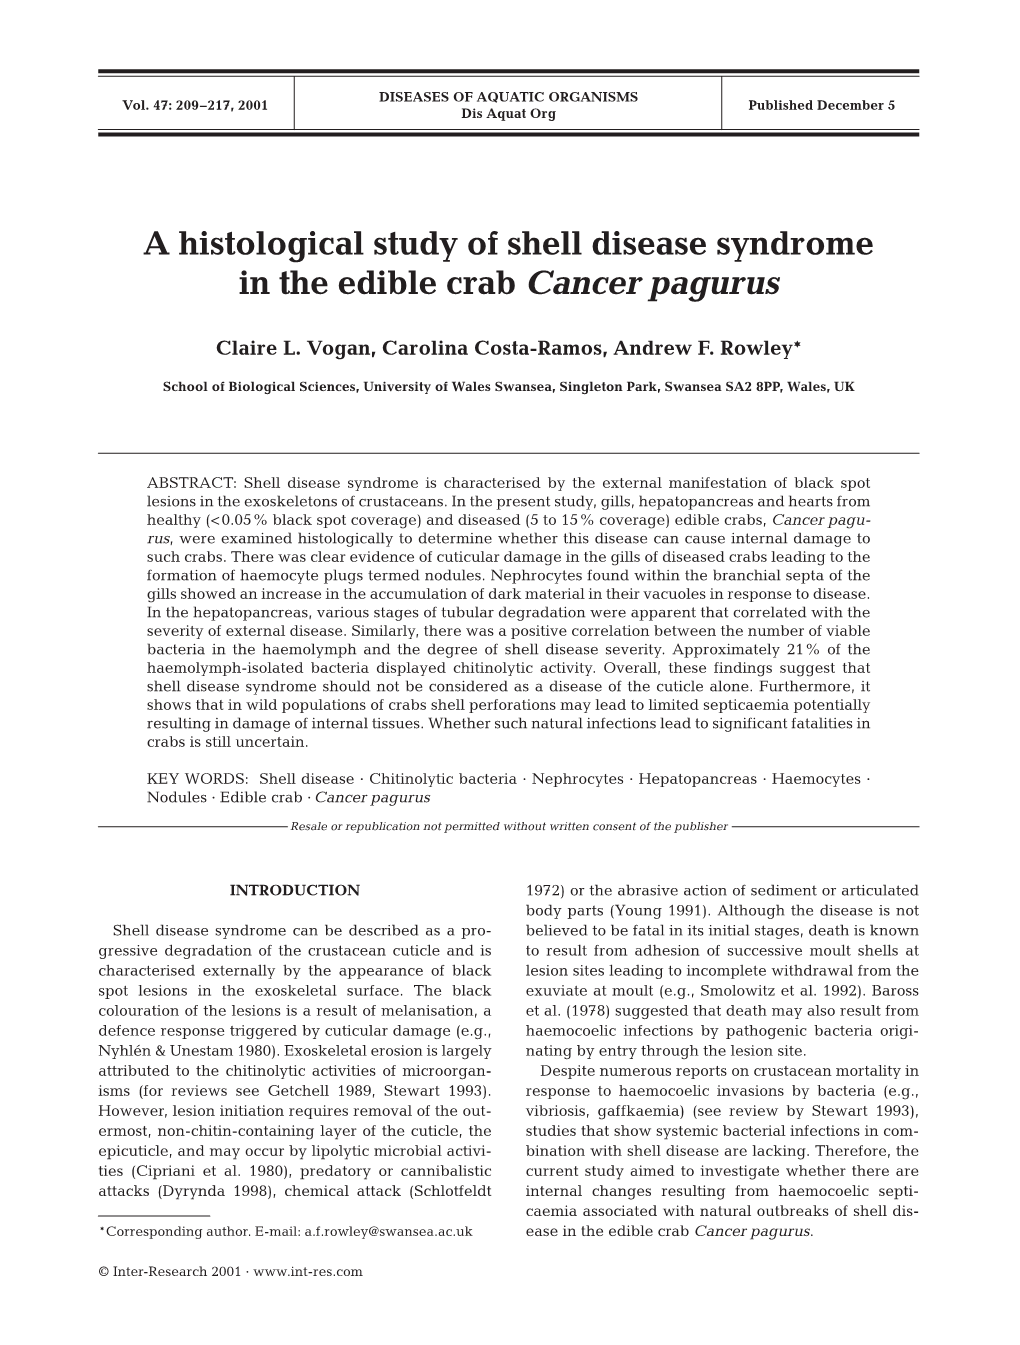 A Histological Study of Shell Disease Syndrome in the Edible Crab Cancer Pagurus